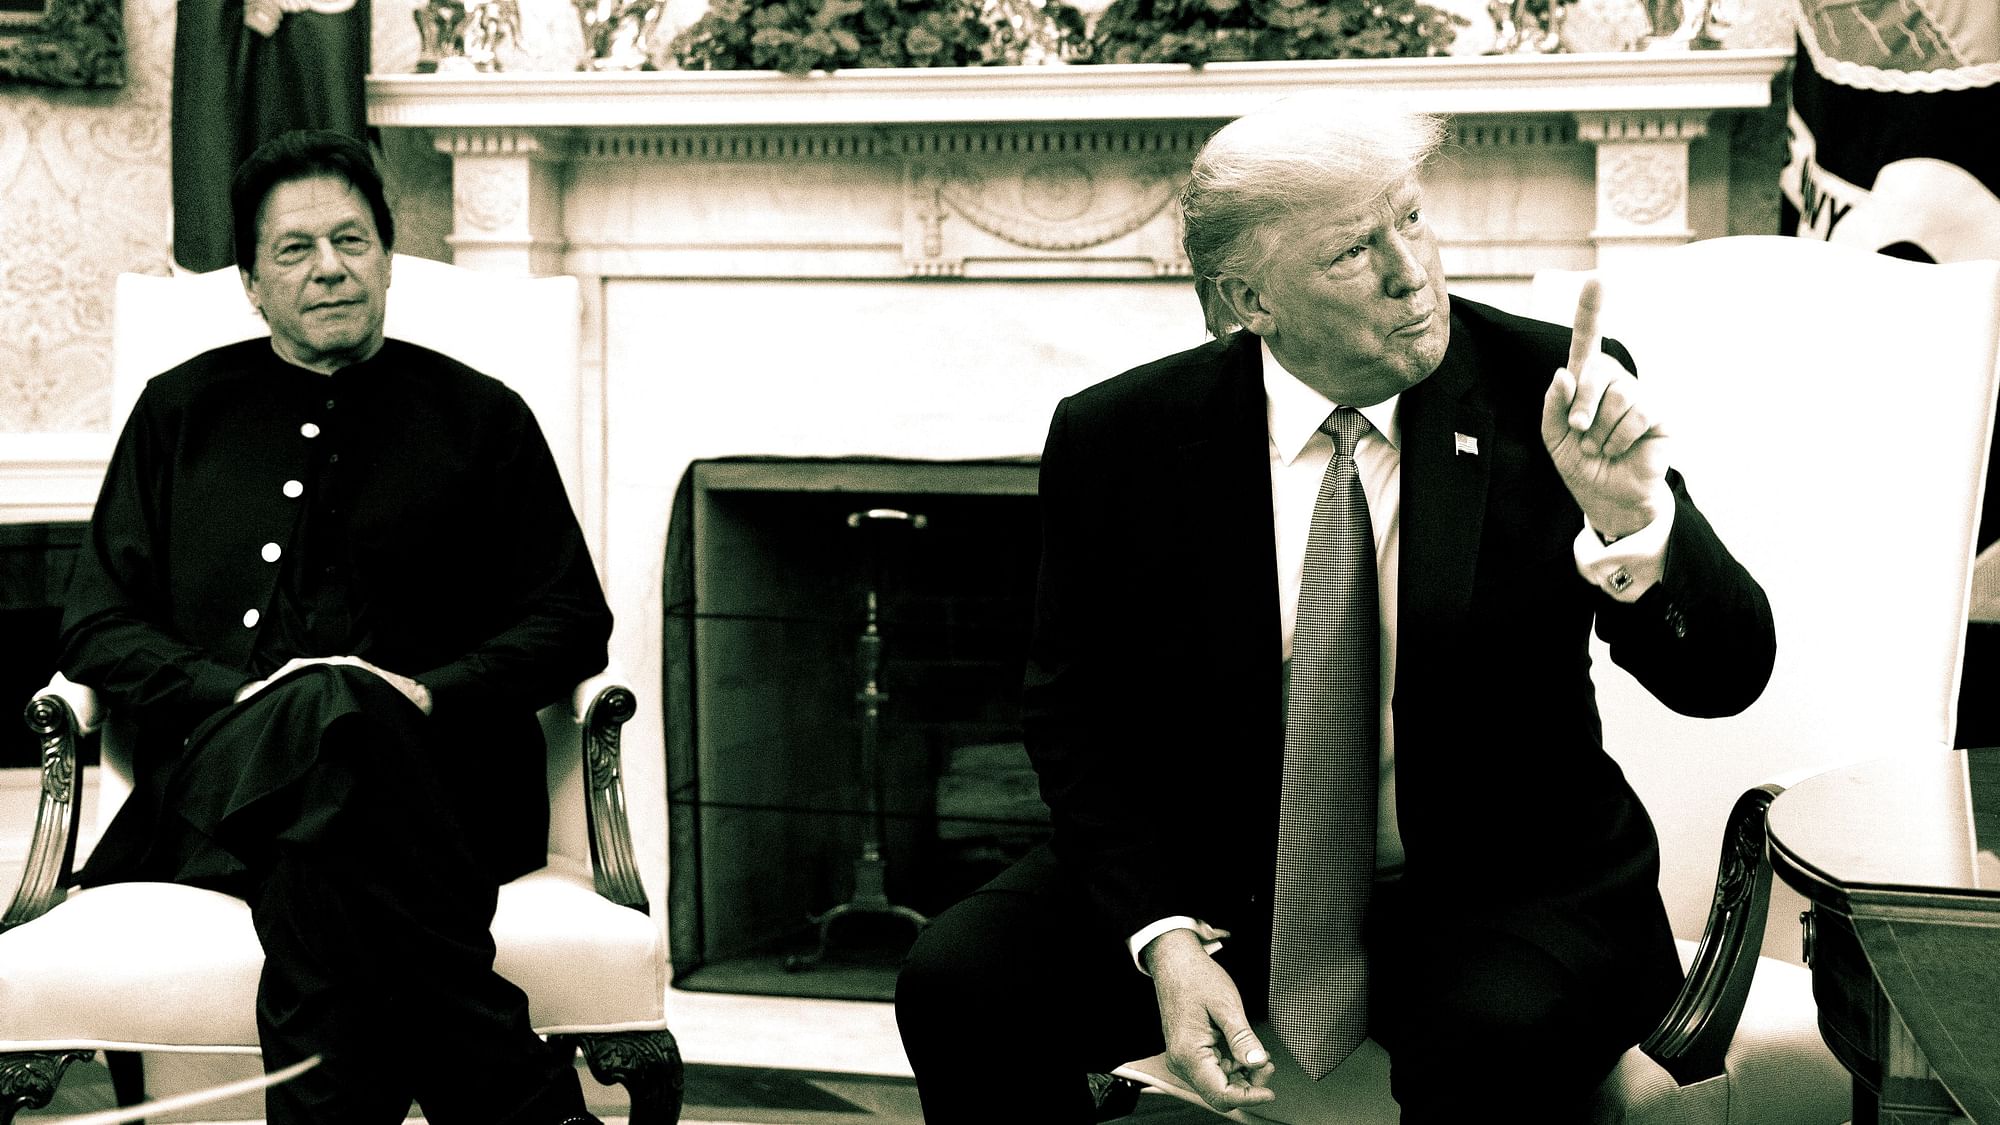 US President Donald Trump with Pakistan Prime Minister Imran Khan. Image used for representational purposes.